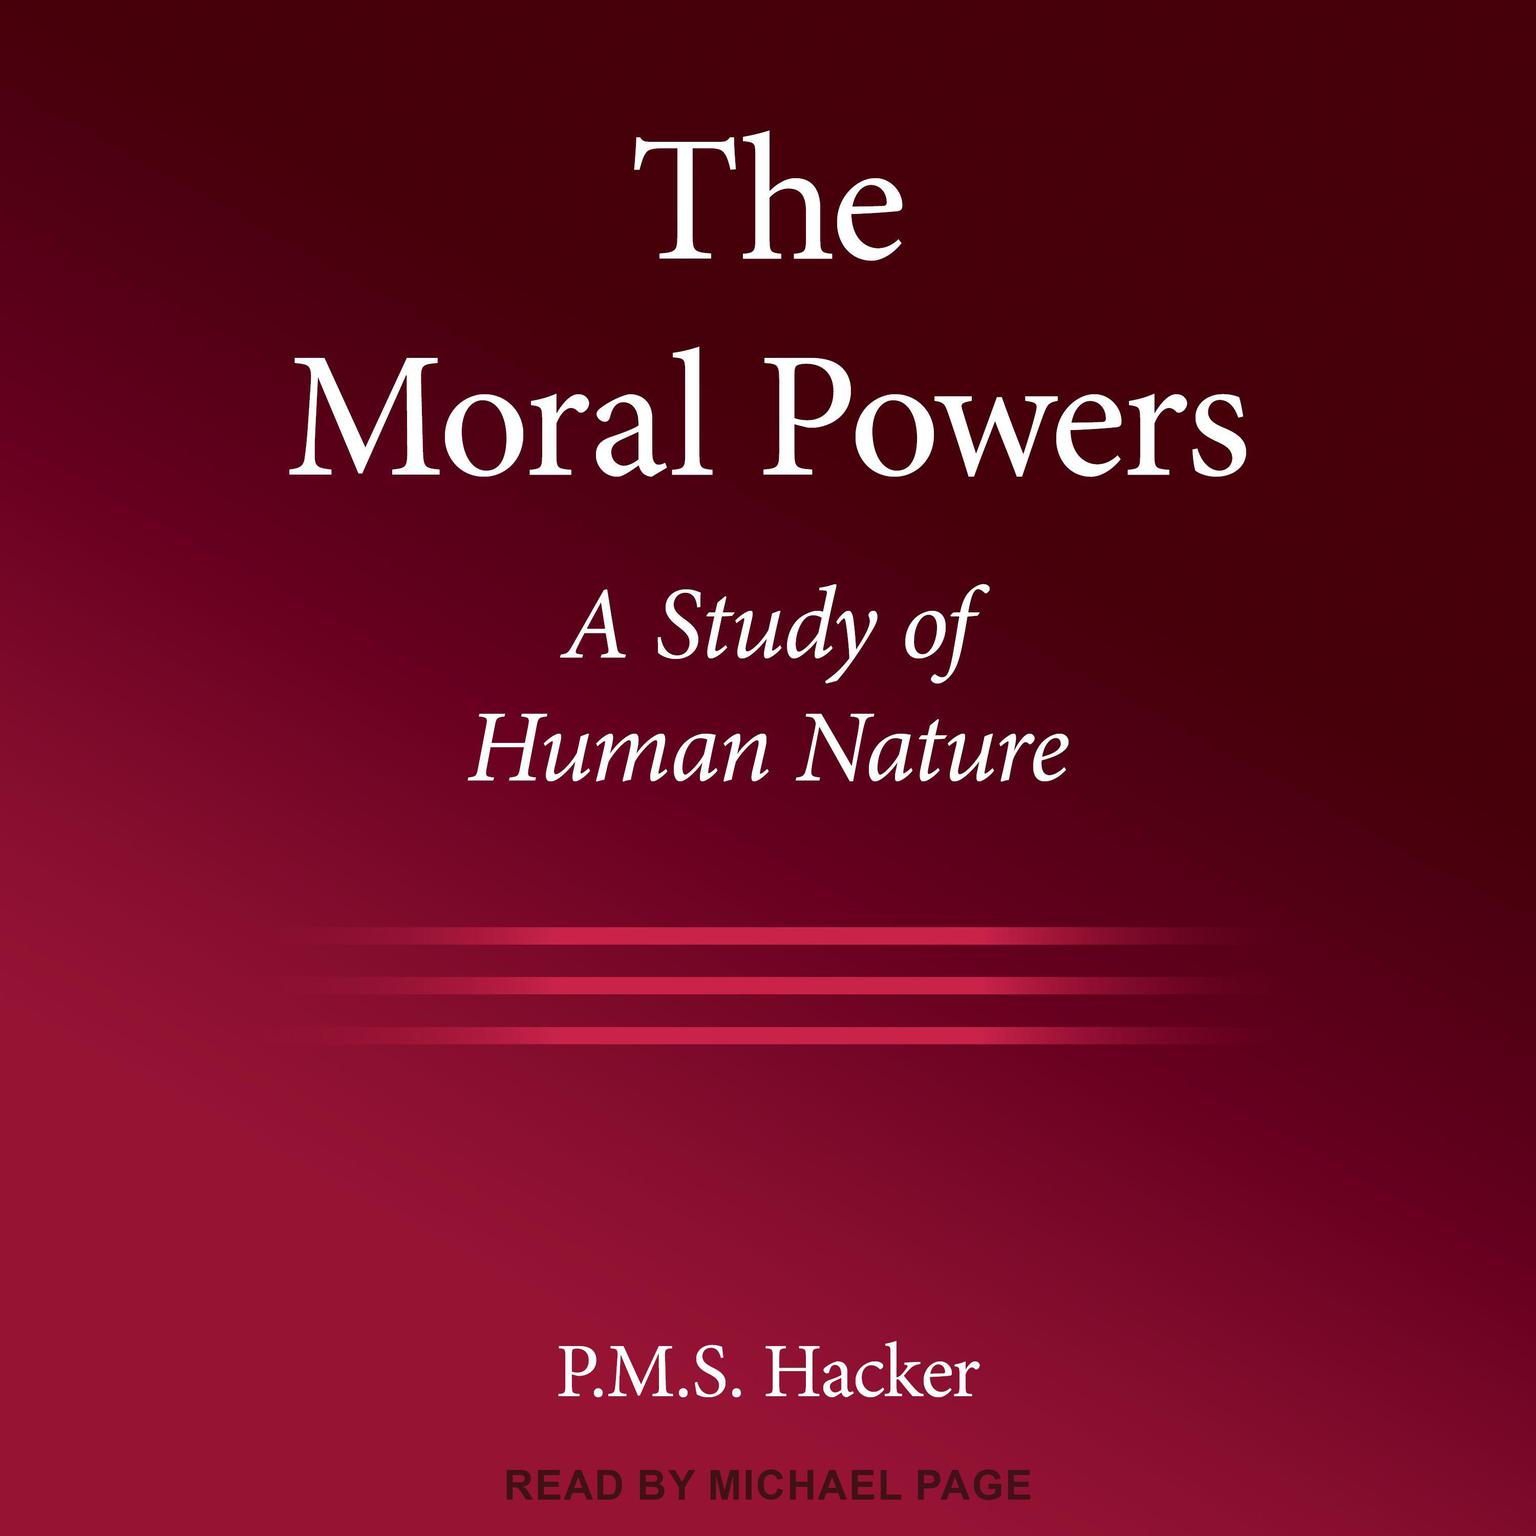 The Moral Powers: A Study of Human Nature Audiobook, by P.M.S. Hacker